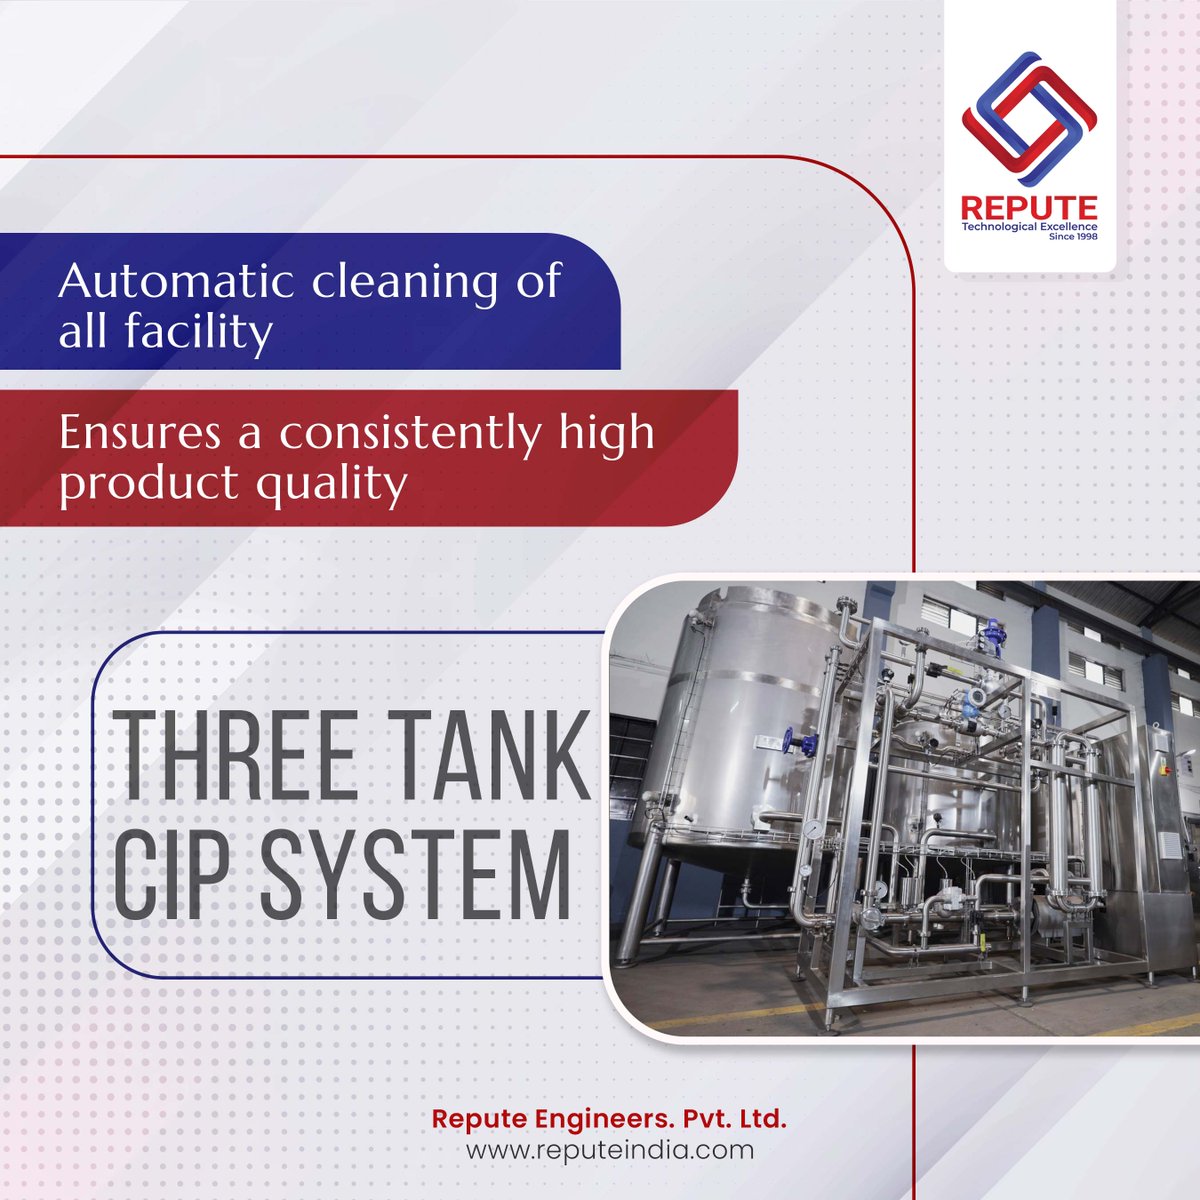 Keep it clean and efficient!

Choose our three tank CIP system for efficient cleaning. Visit reputeindia.com for more.
#dairyprocessing #dairyindustry #reputeengineers #cipcleaning